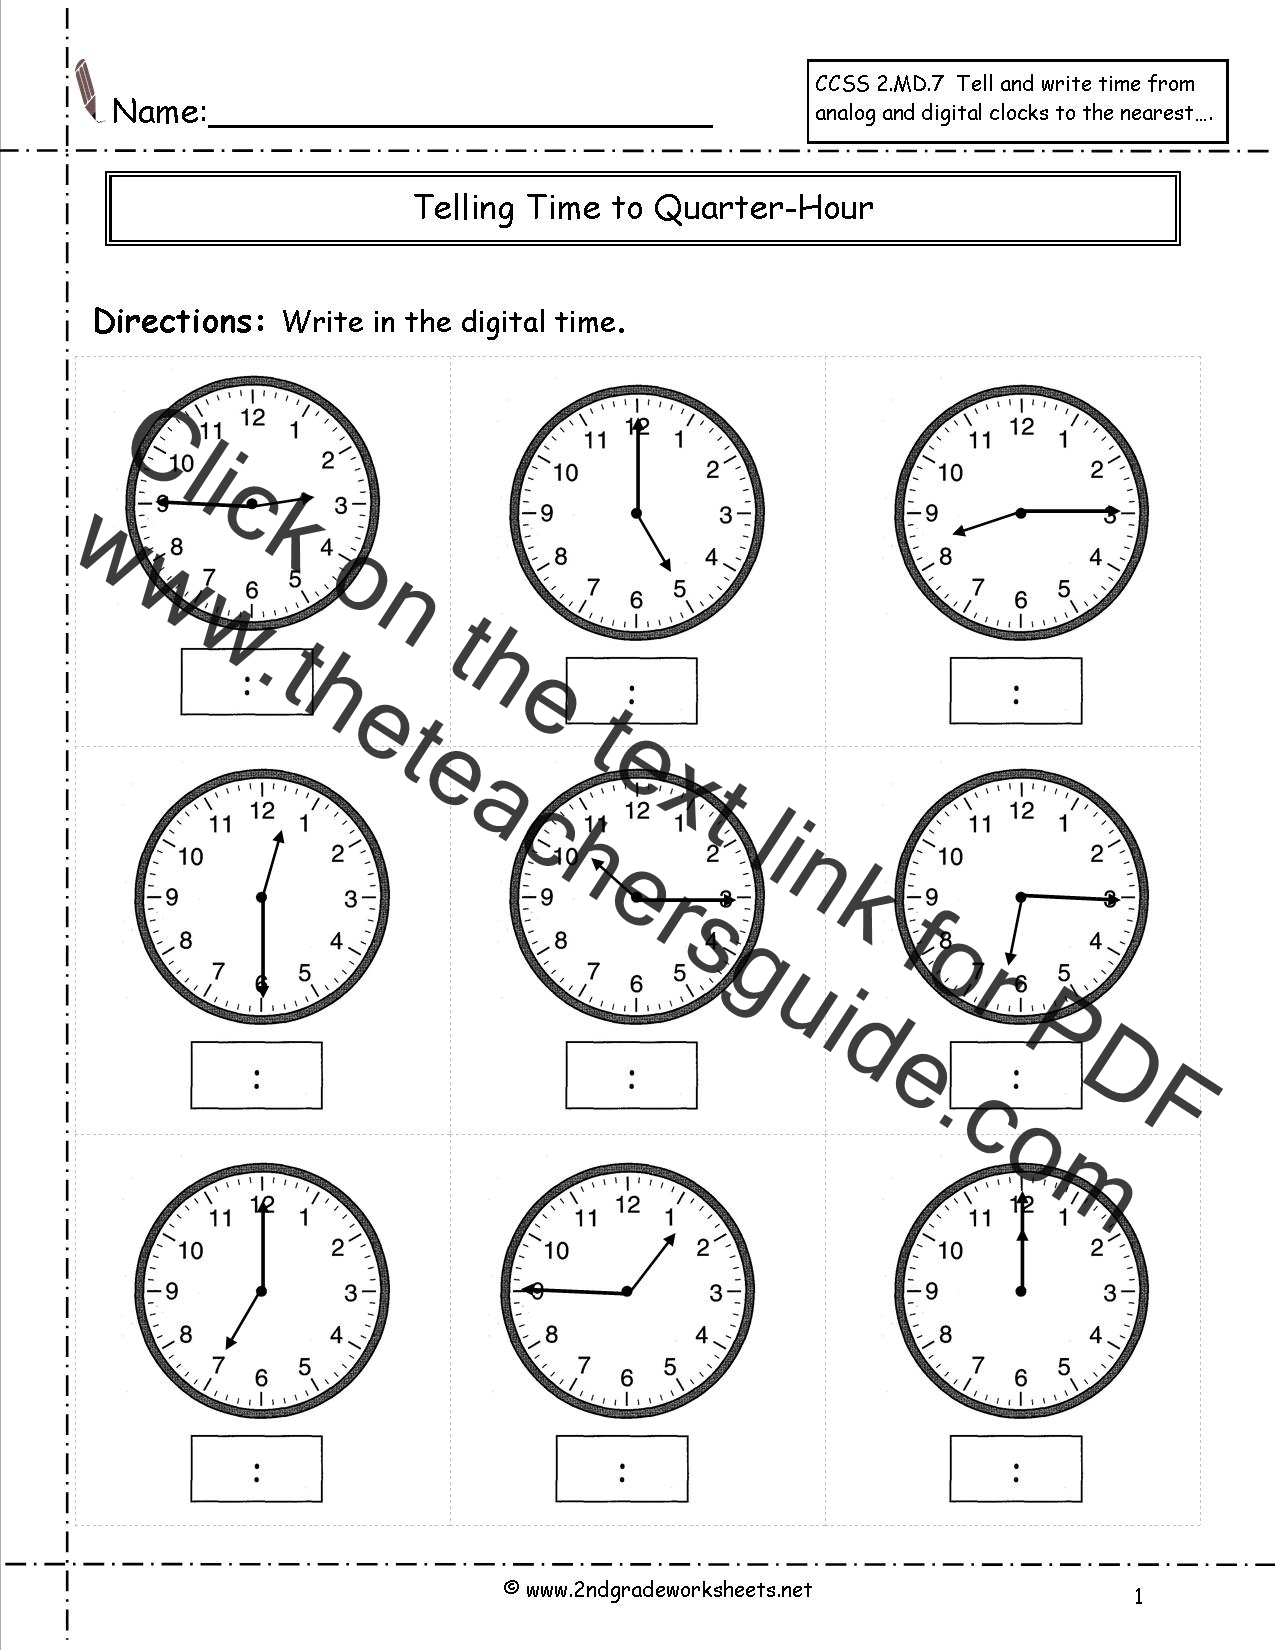 Telling Time Worksheets Grade 4 to the nearest minute